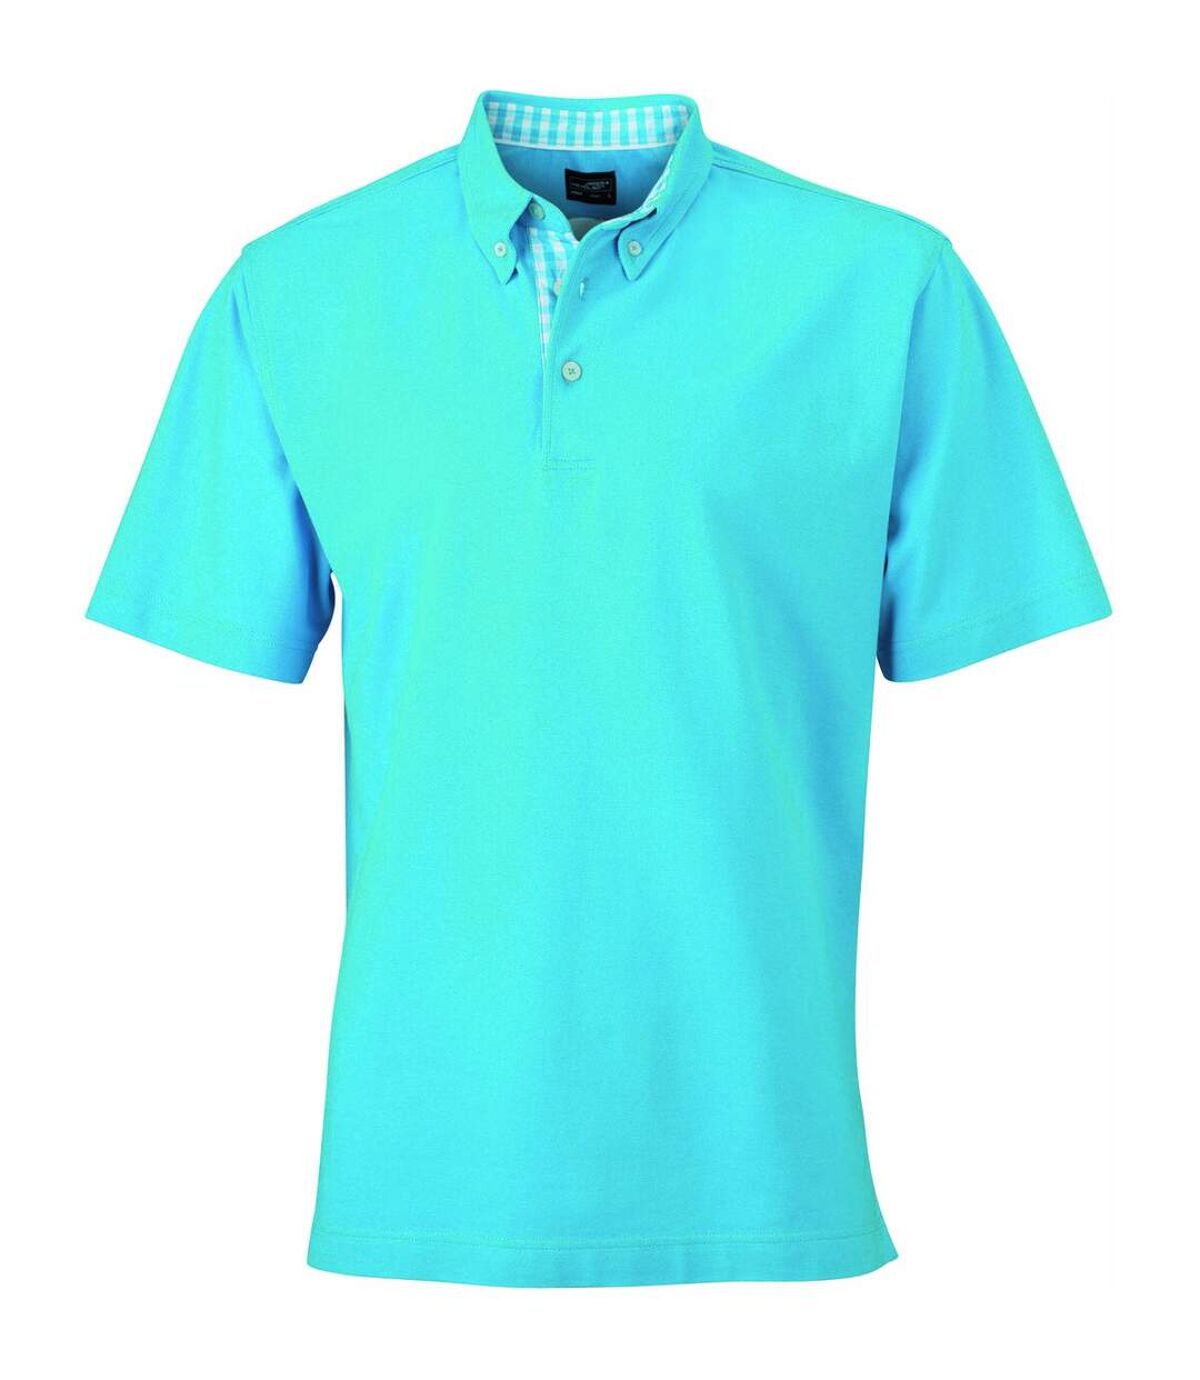 Polo inserts vichy HOMME JN964 - bleu turquoise col turquoise-blanc